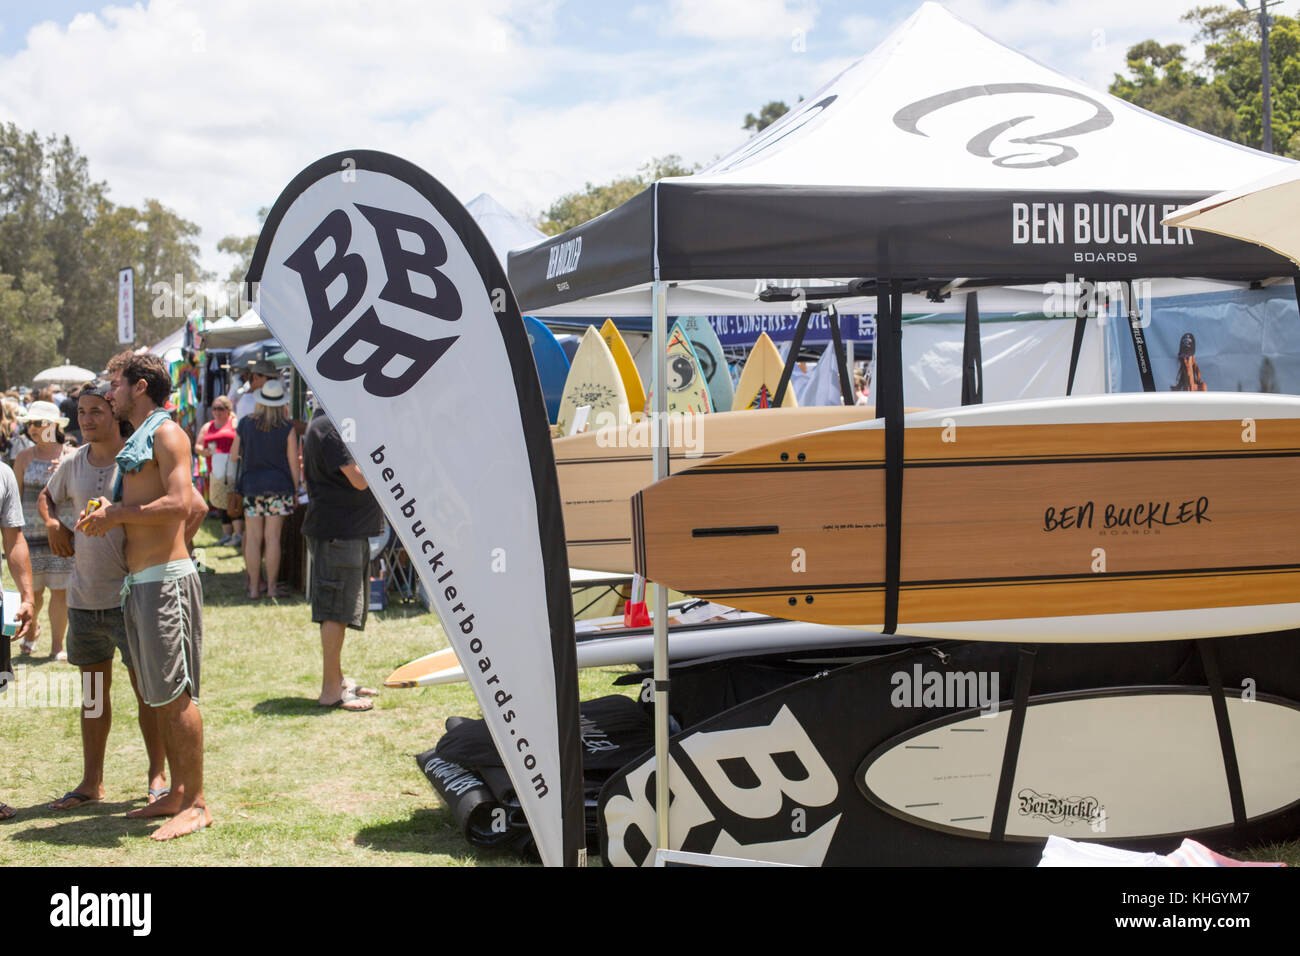 Avalon Beach, Sydney, Sunday 19th November 2017. The annual community market day at Avalon Beach features over 400 stalls selling crafts, clothing, jewellry, art and gifts. Credit: martin berry/Alamy Live News Stock Photo